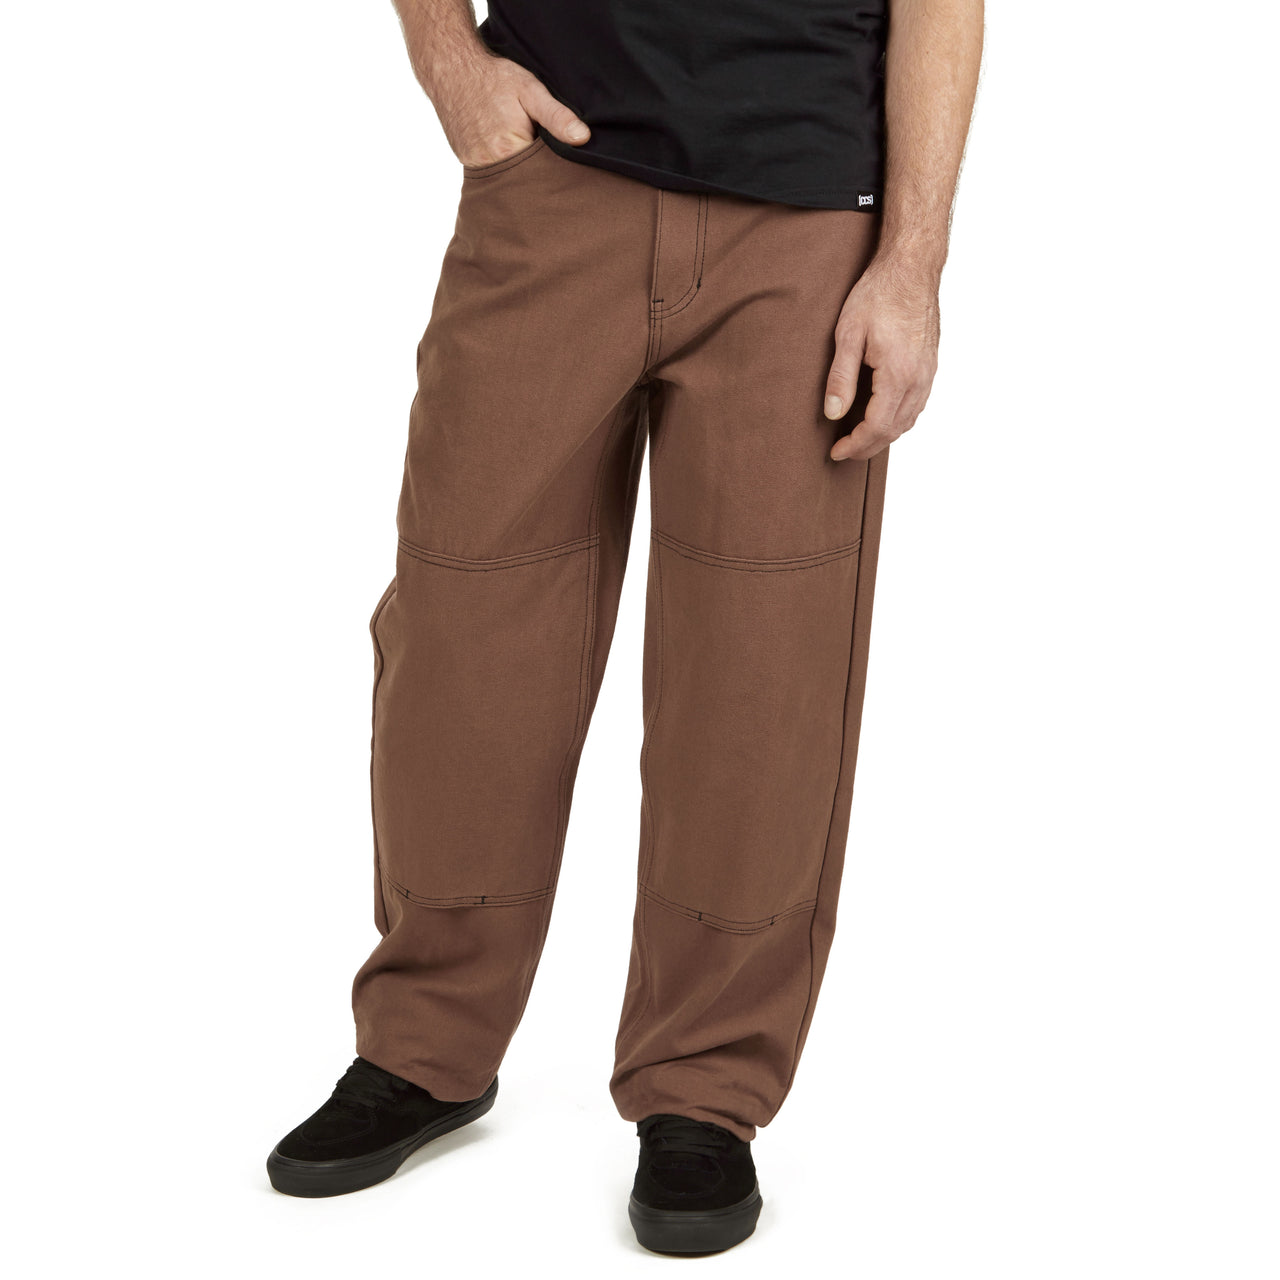 CCS Double Knee Original Relaxed Canvas Pants - Brown/Black